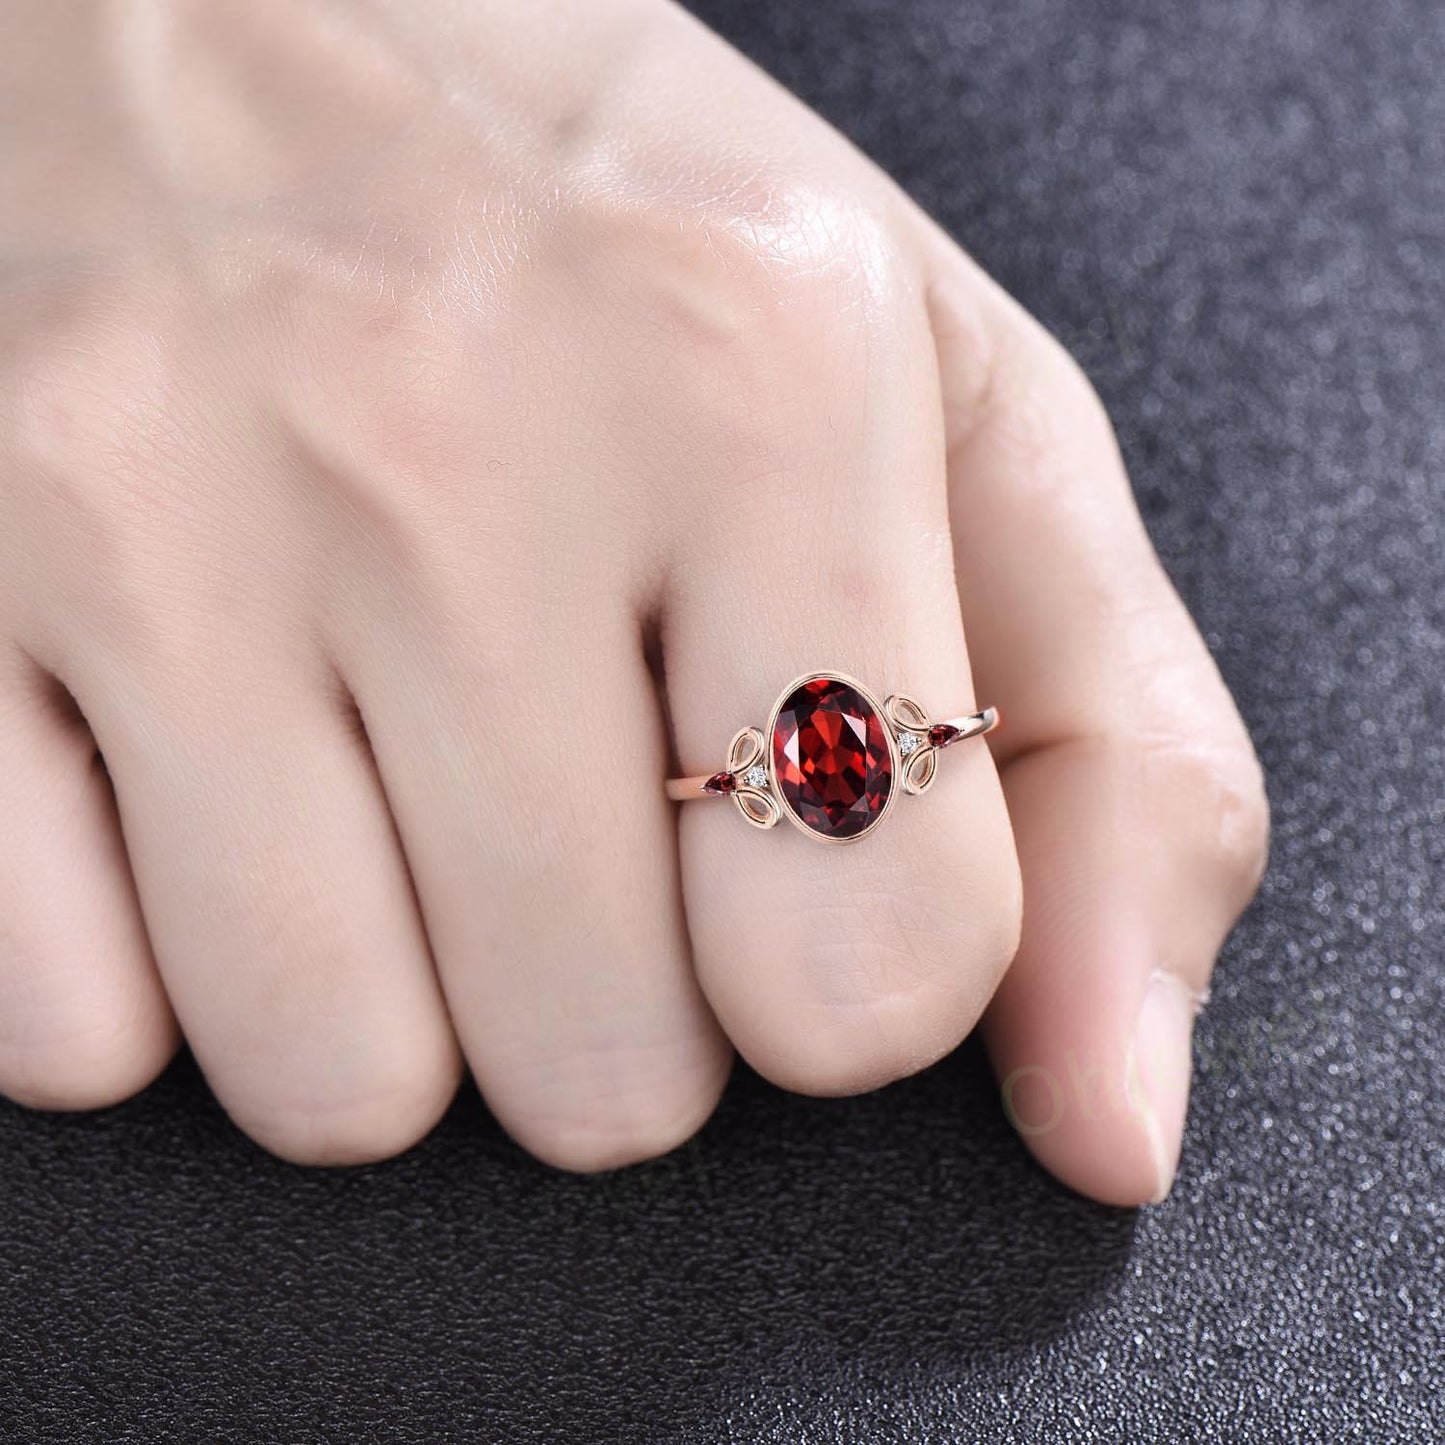 Oval red garnet ring vintage rose gold bezel unique engagement ring art deco five stone bridal wedding anniversary ring gift for women